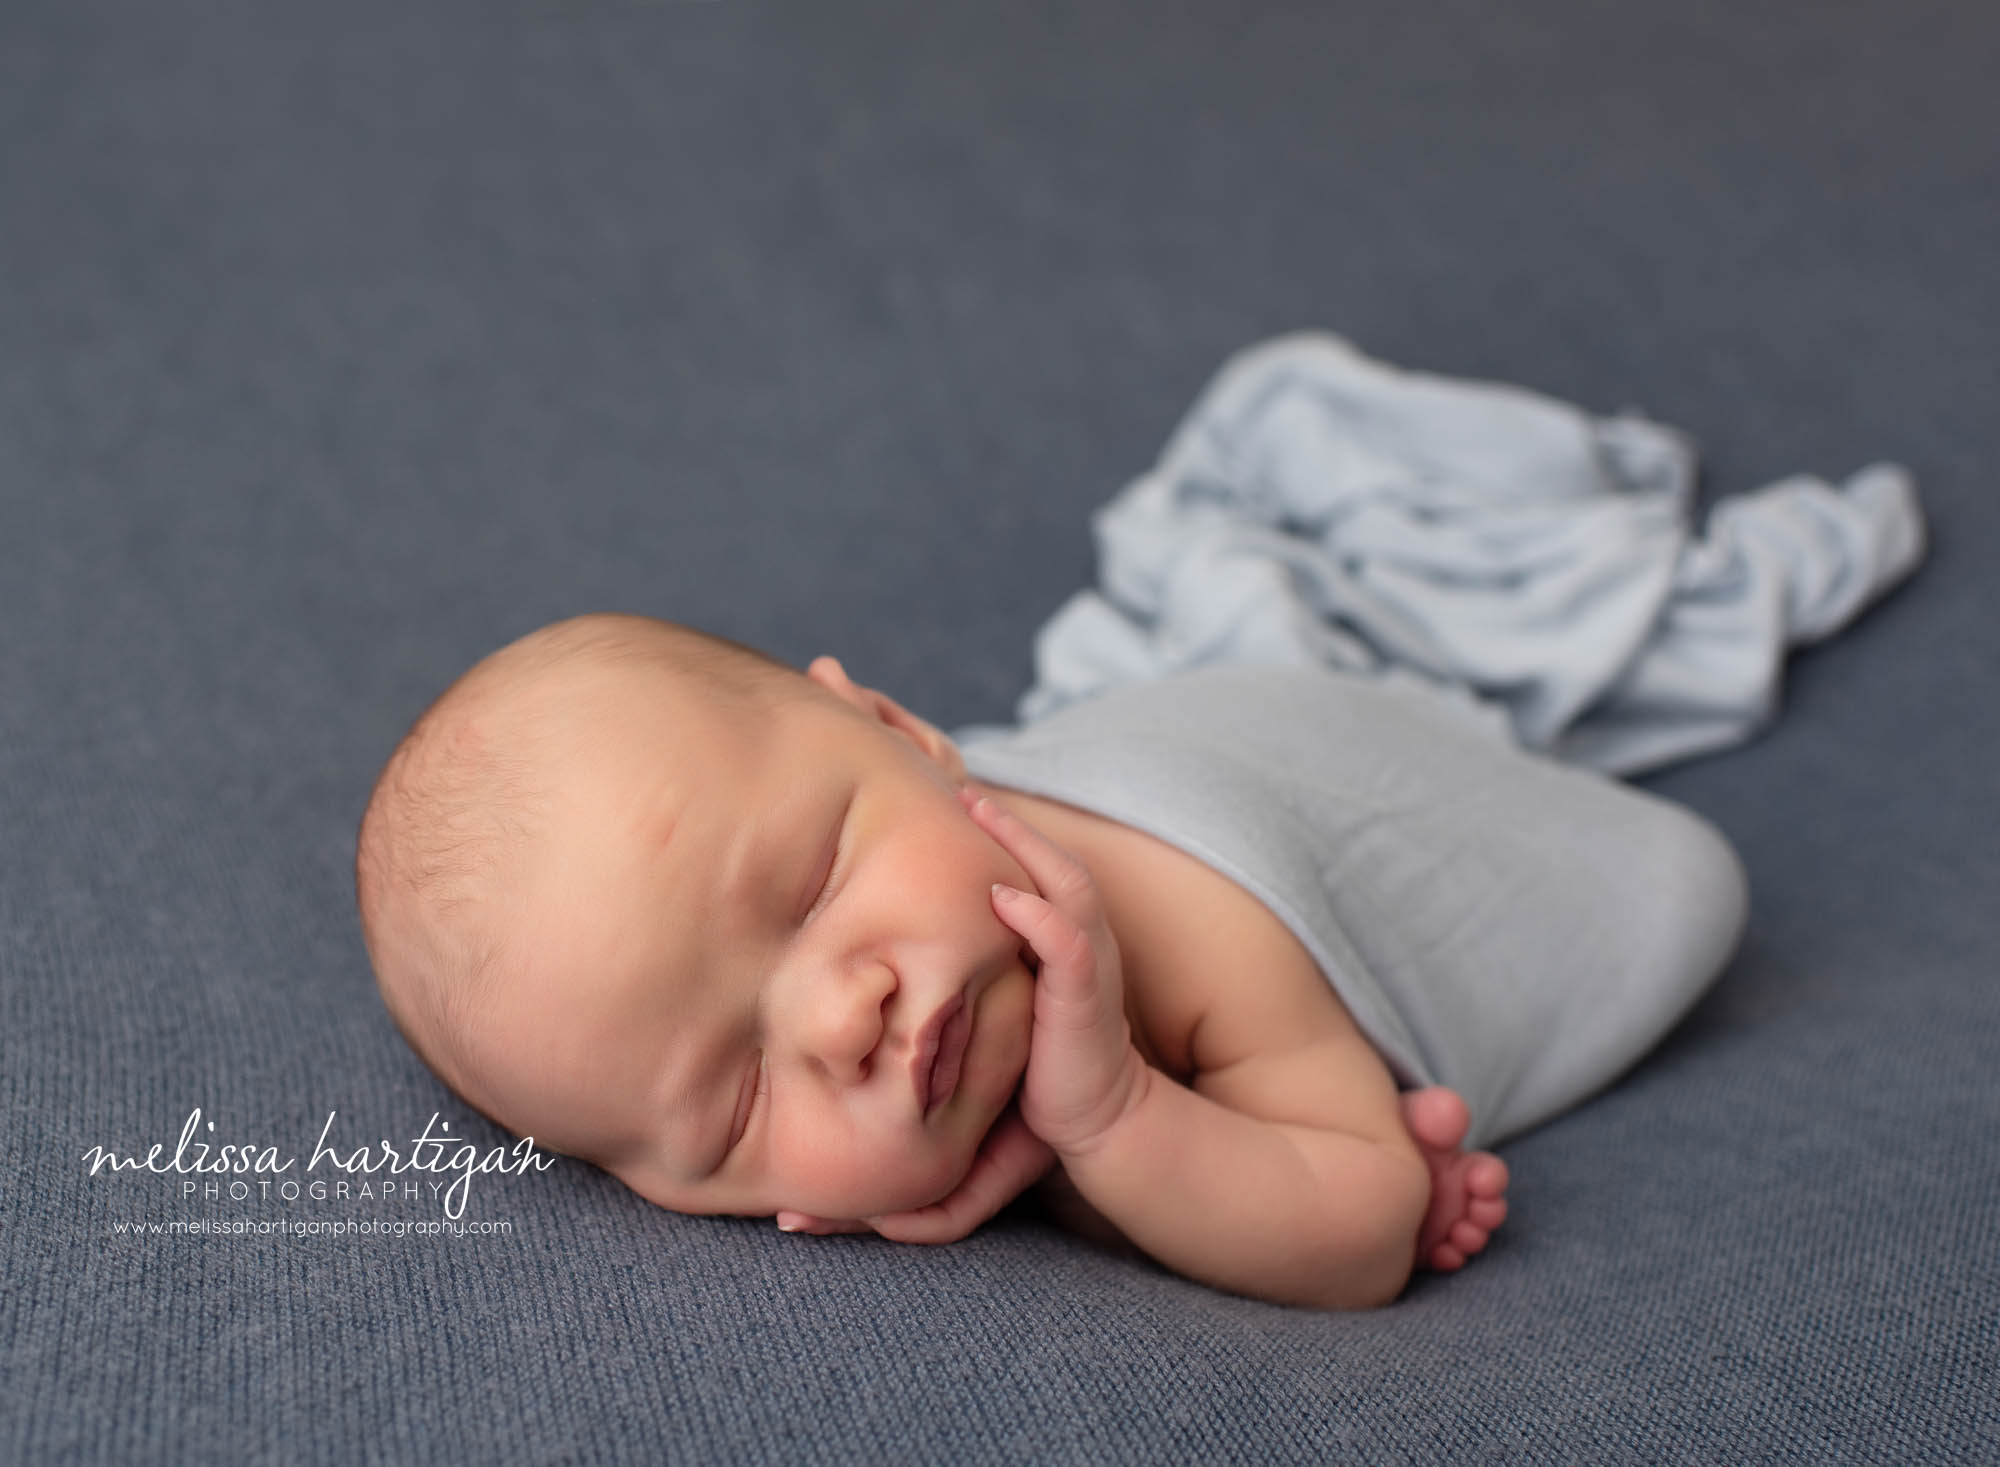 Newborn baby boy posed on blue gray backdrop with light blue wrap dropped over